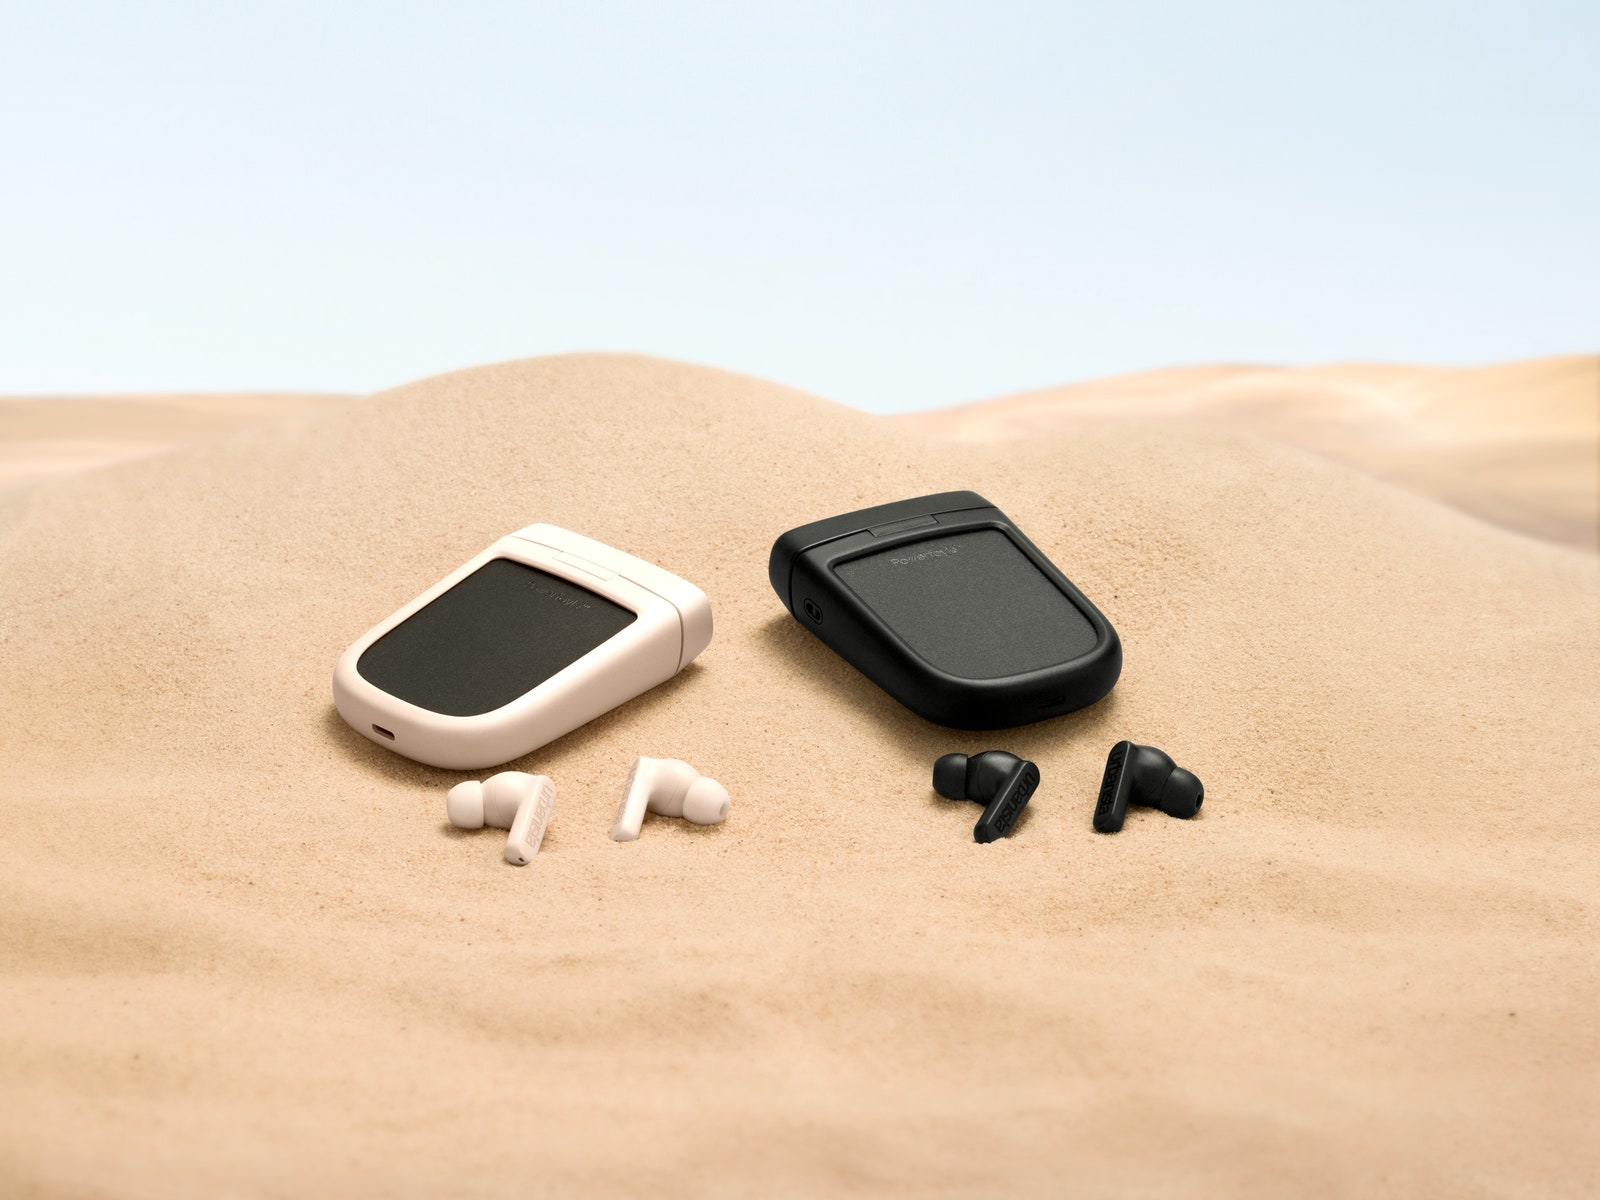 Urbanista Phoenix earbuds and charging case lying on sand